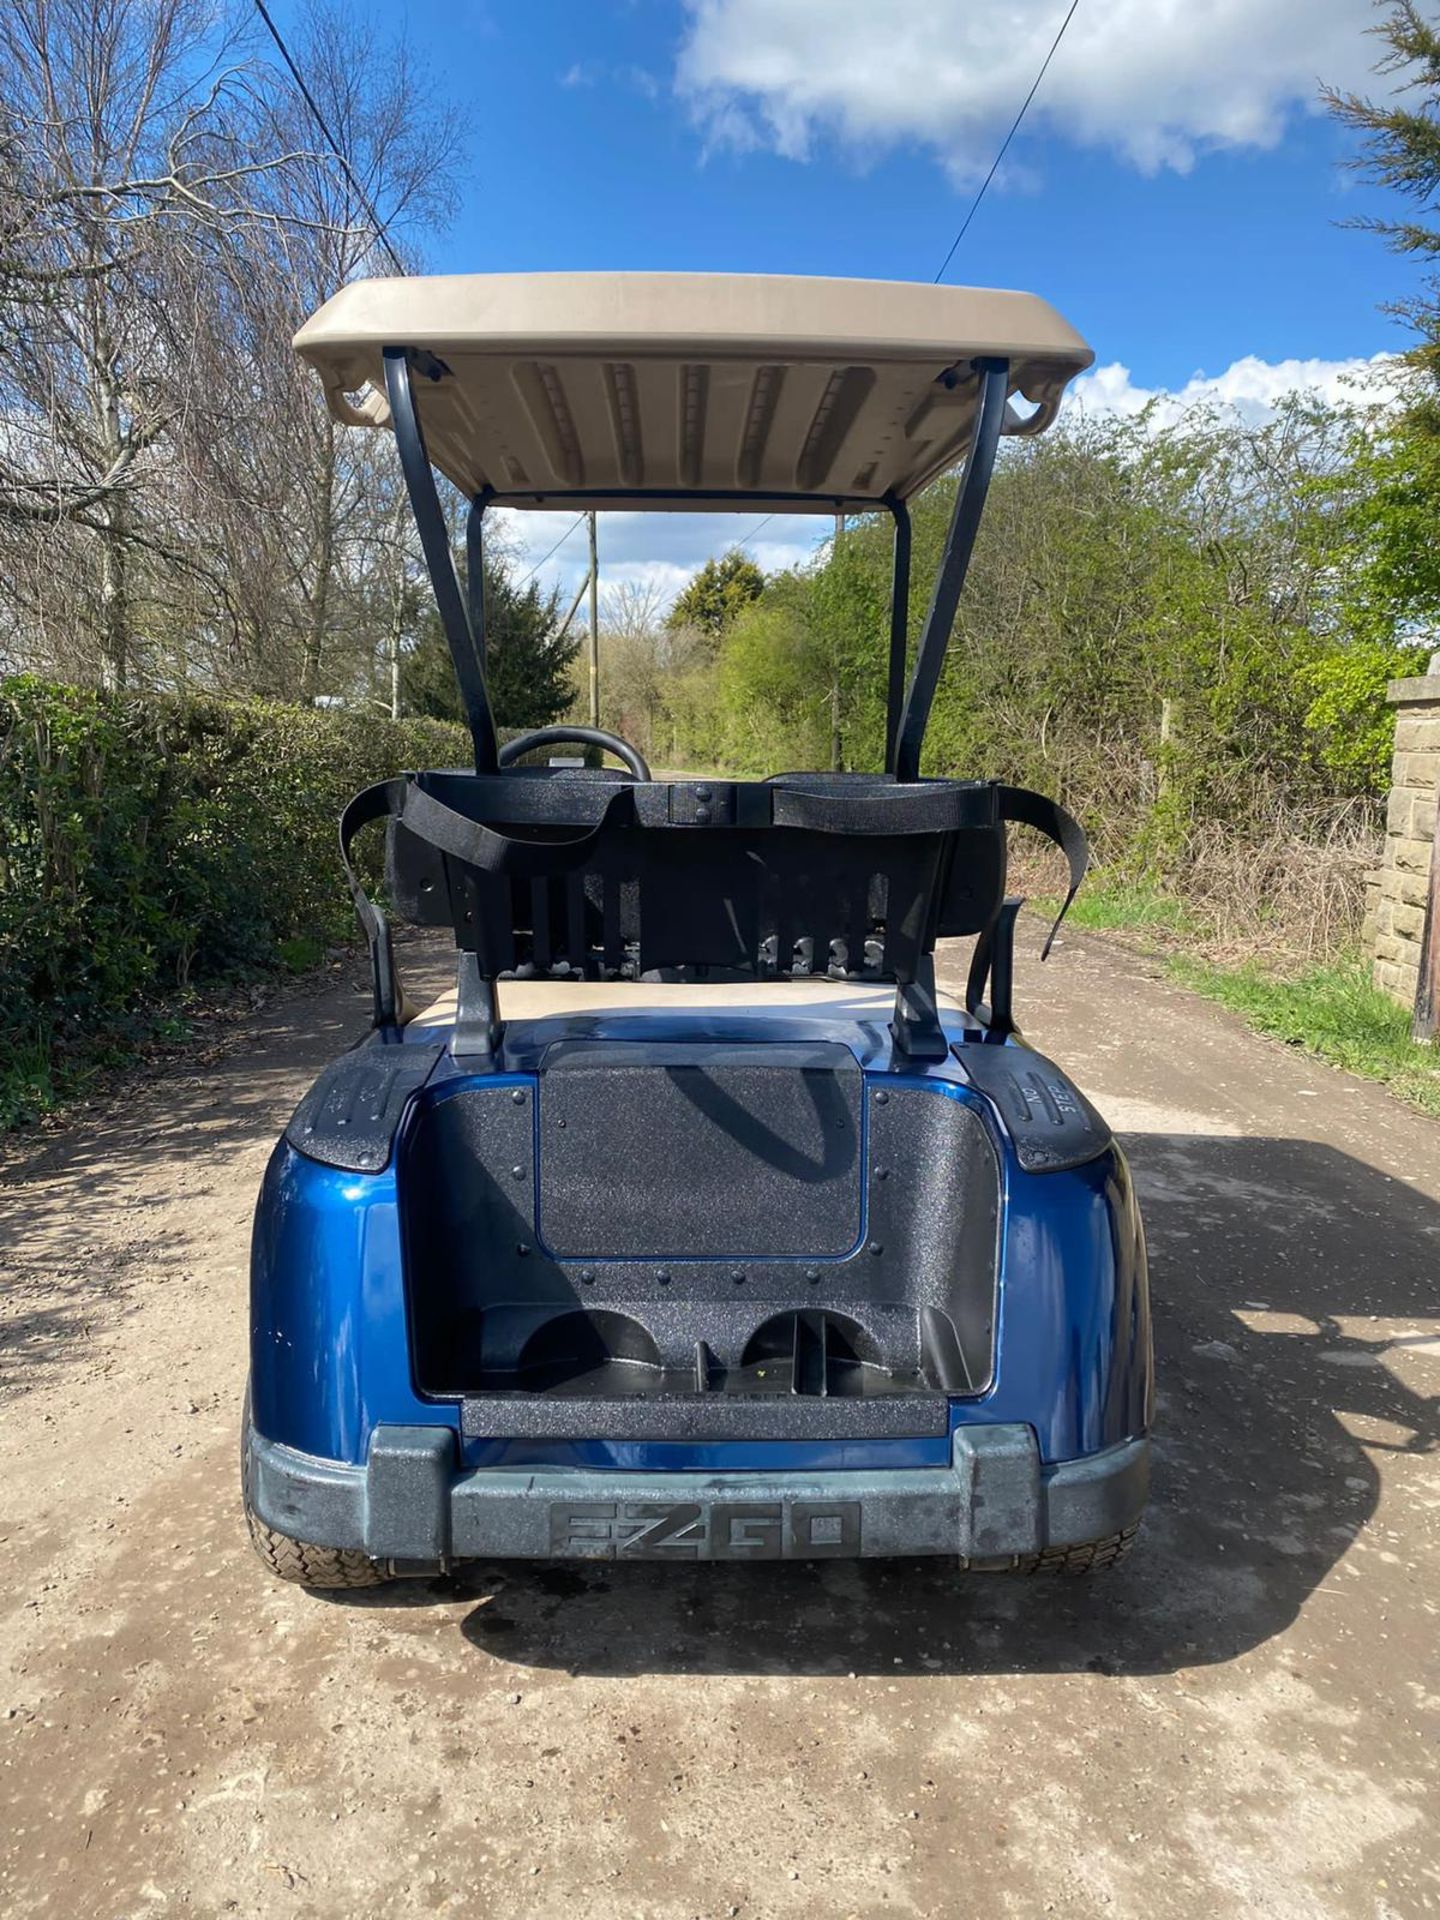 EZ-GO RXV GOLF CART BATTERY OPERATED, RUNS AND DRIVES, GOOD TYRES ALL ROUND *PLUS VAT* - Image 6 of 9